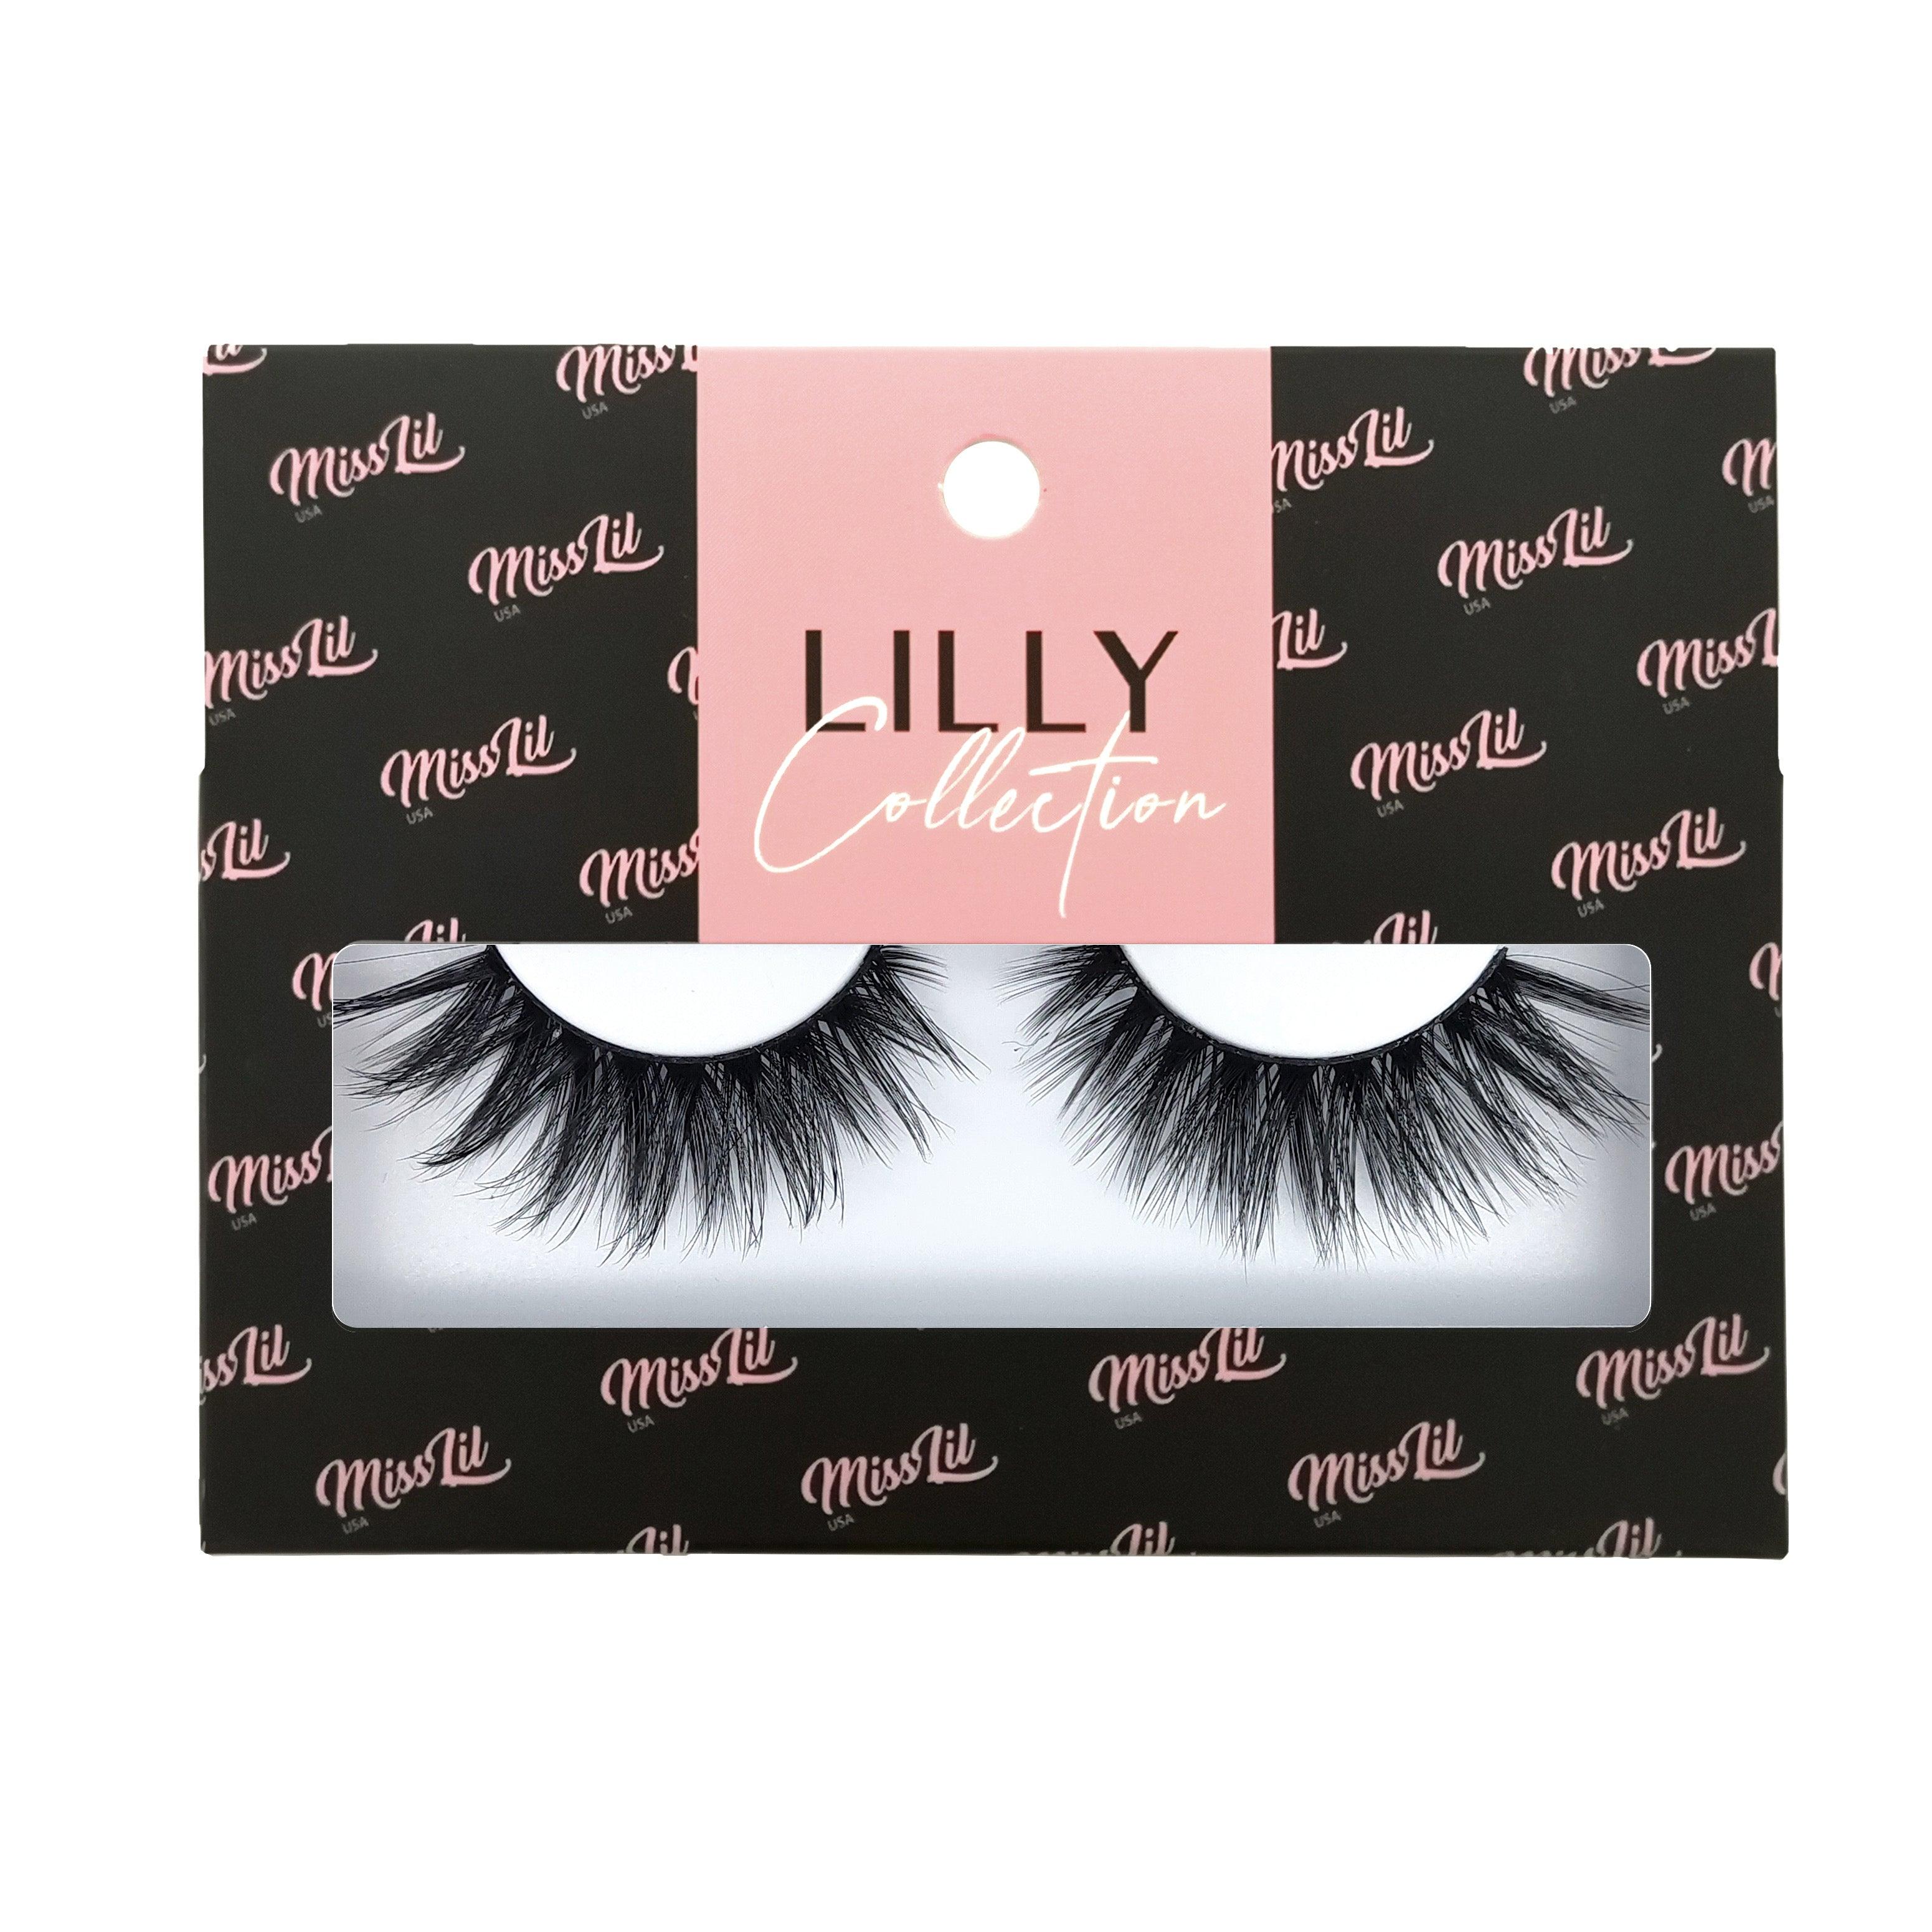 1-Pair Lashes-Lilly Collection #2 (Pack of 12) - Miss Lil USA Wholesale